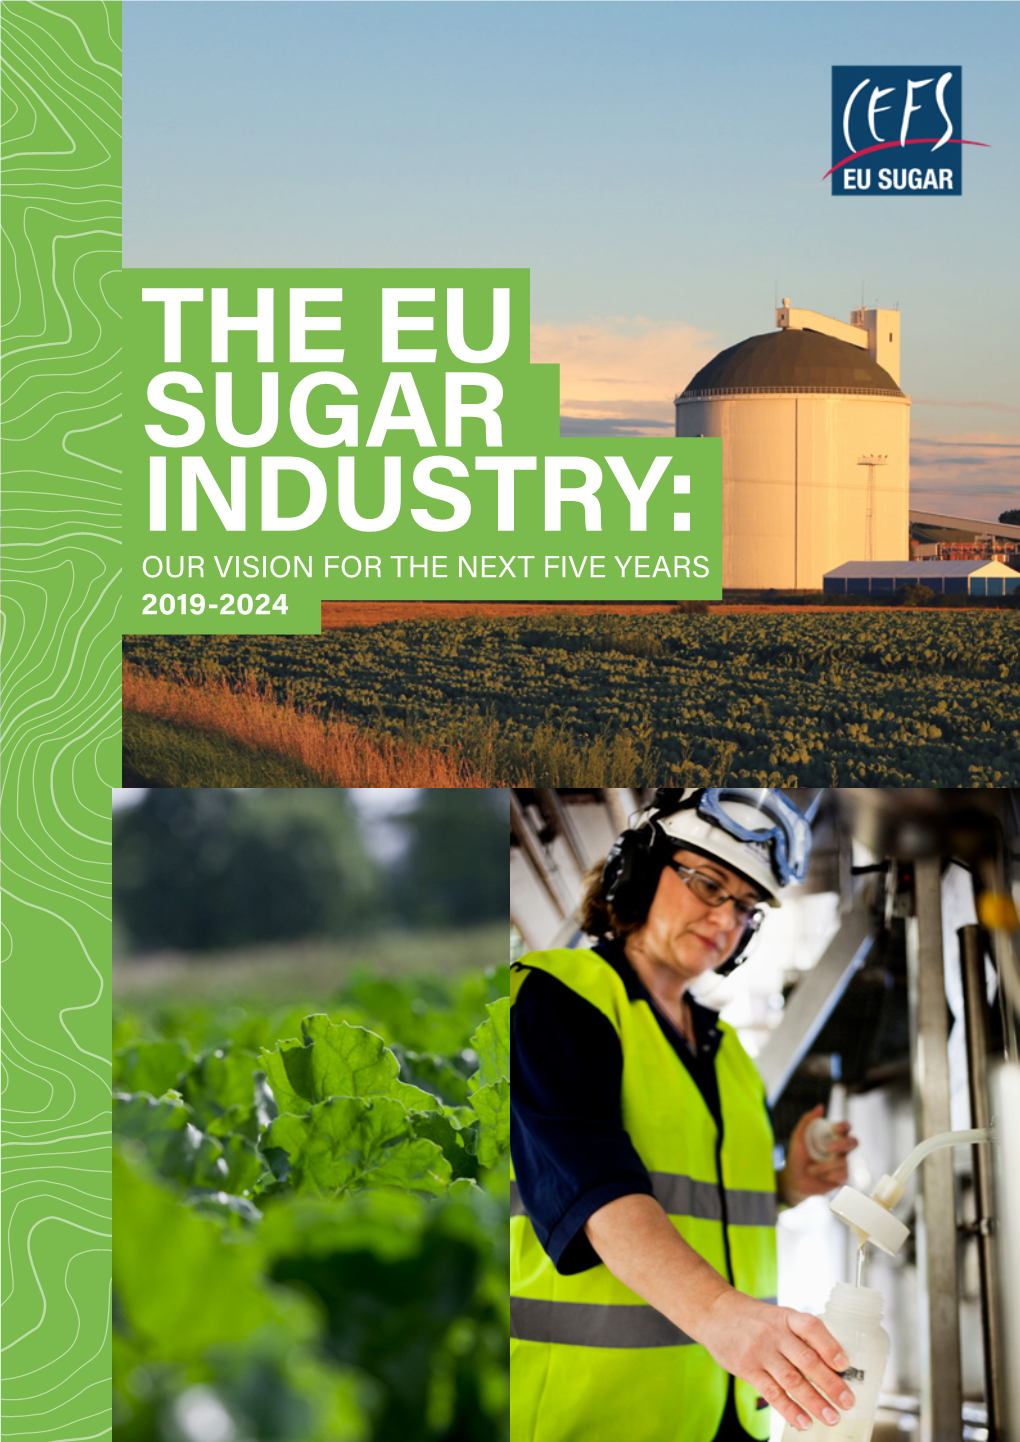 The Eu Sugar Industry: Our Vision for the Next Five Years 2019-2024 3